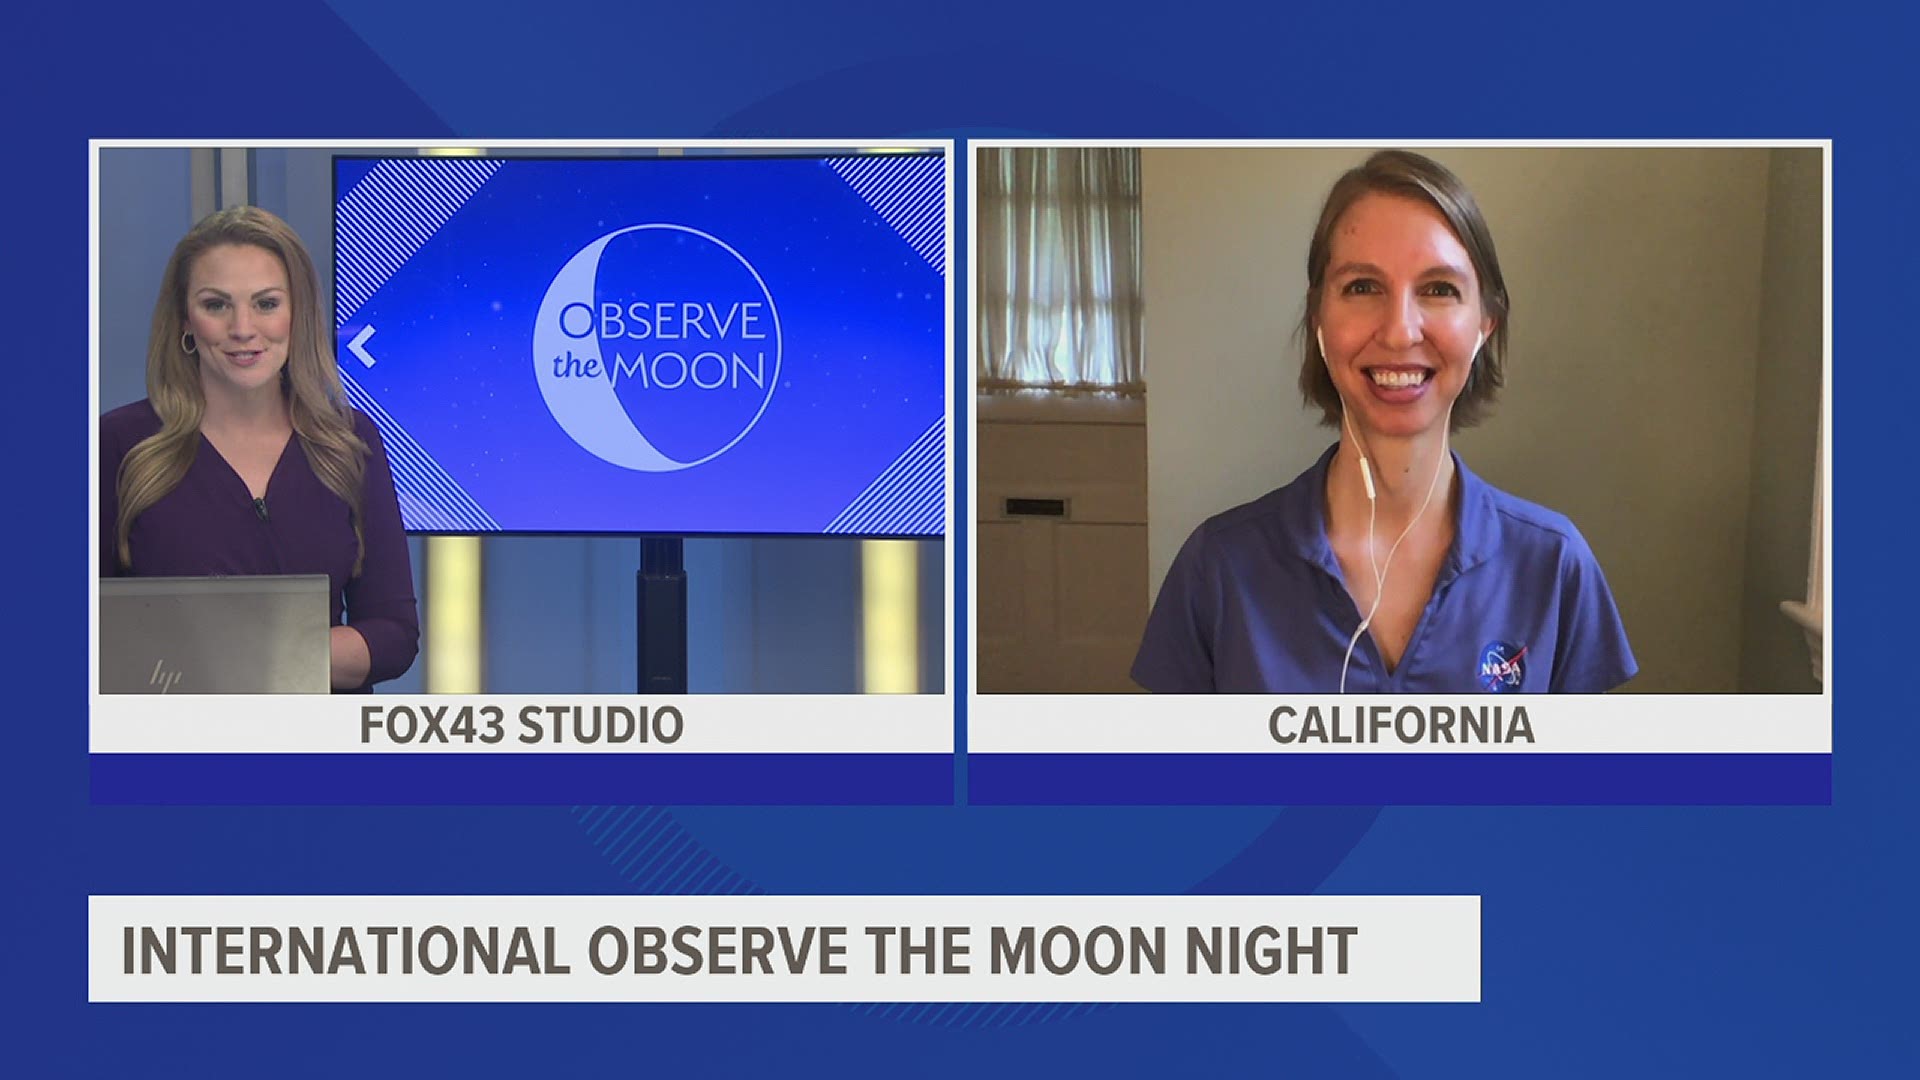 People from every continent come together for International Observe the Moon Night.